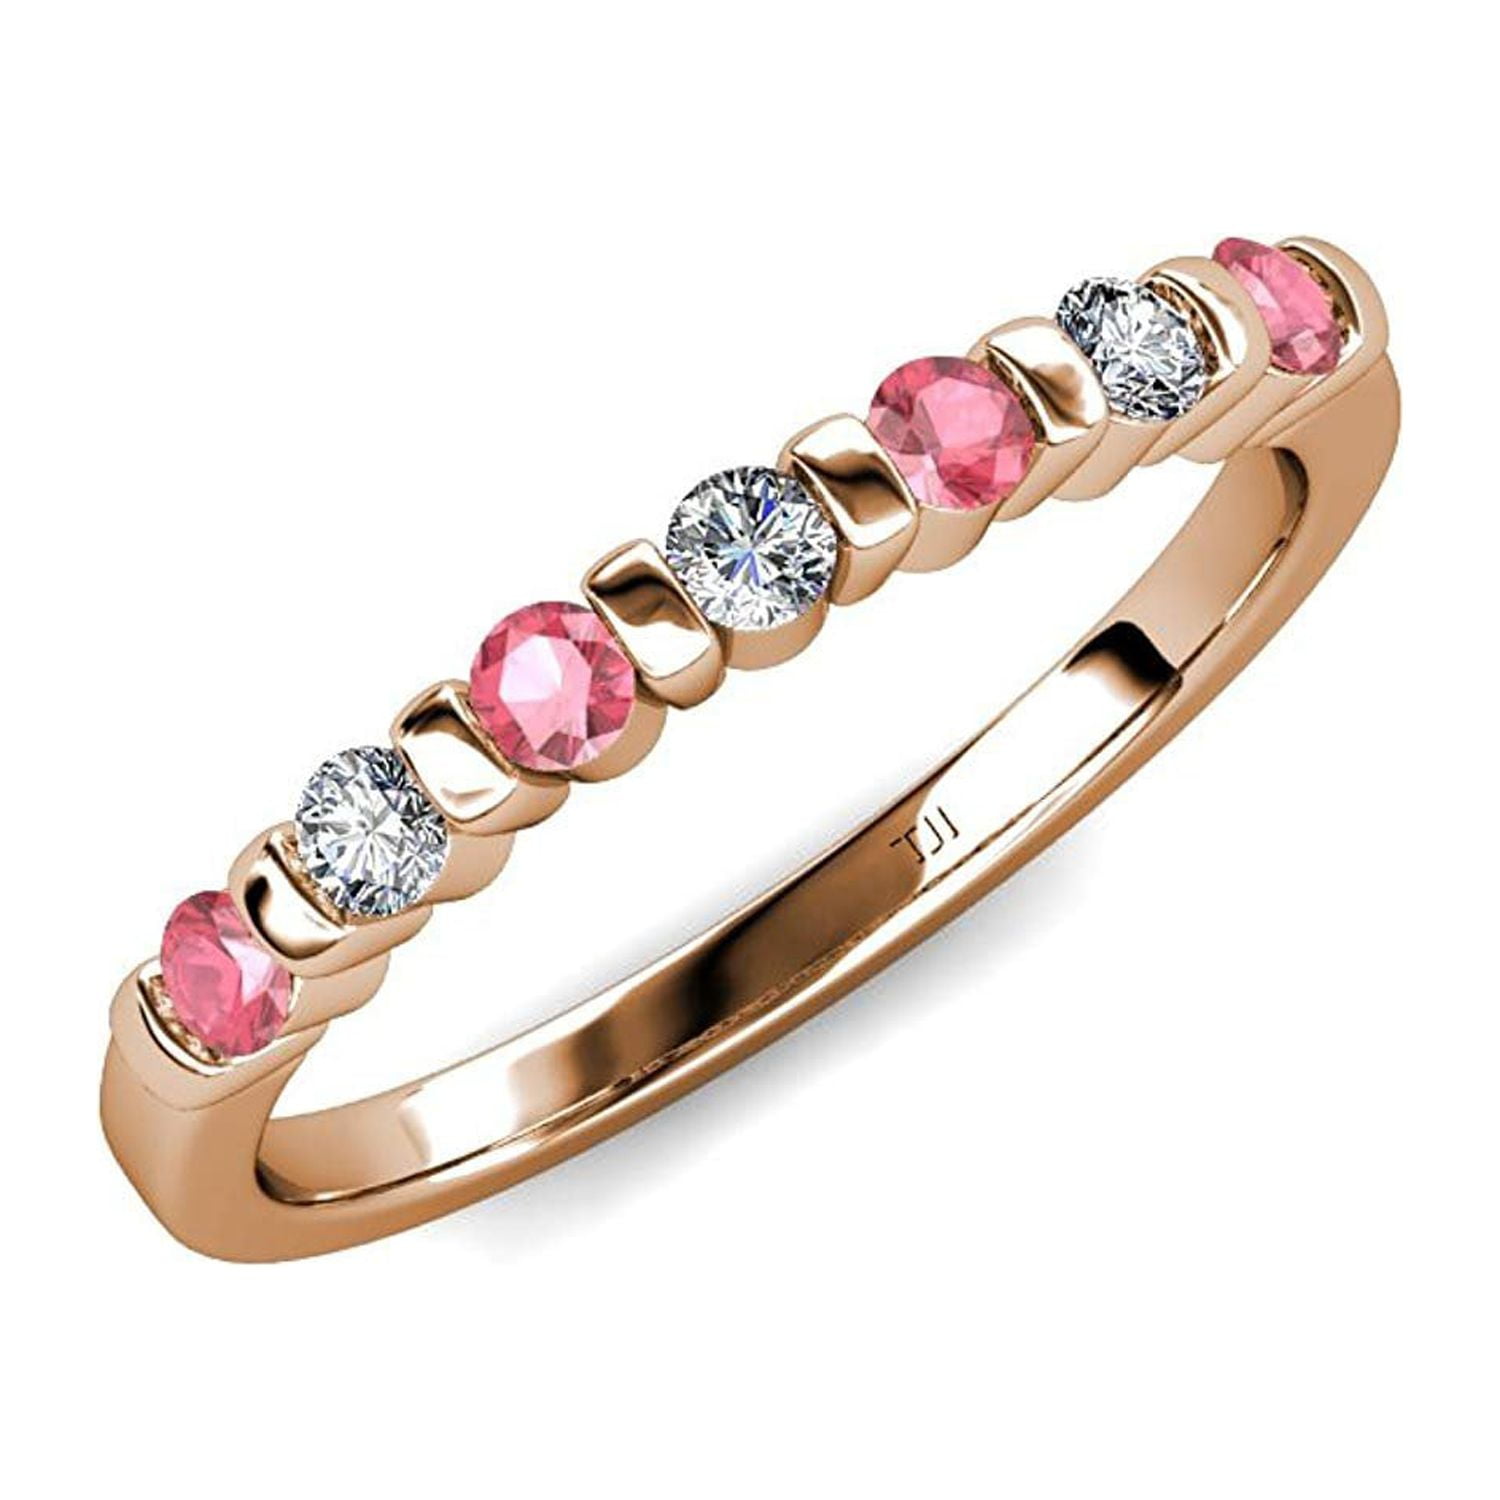 Pink Tourmaline and Diamond 7 Stone Wedding Band 0.22 ct tw in 14K Rose Gold.size 8.5